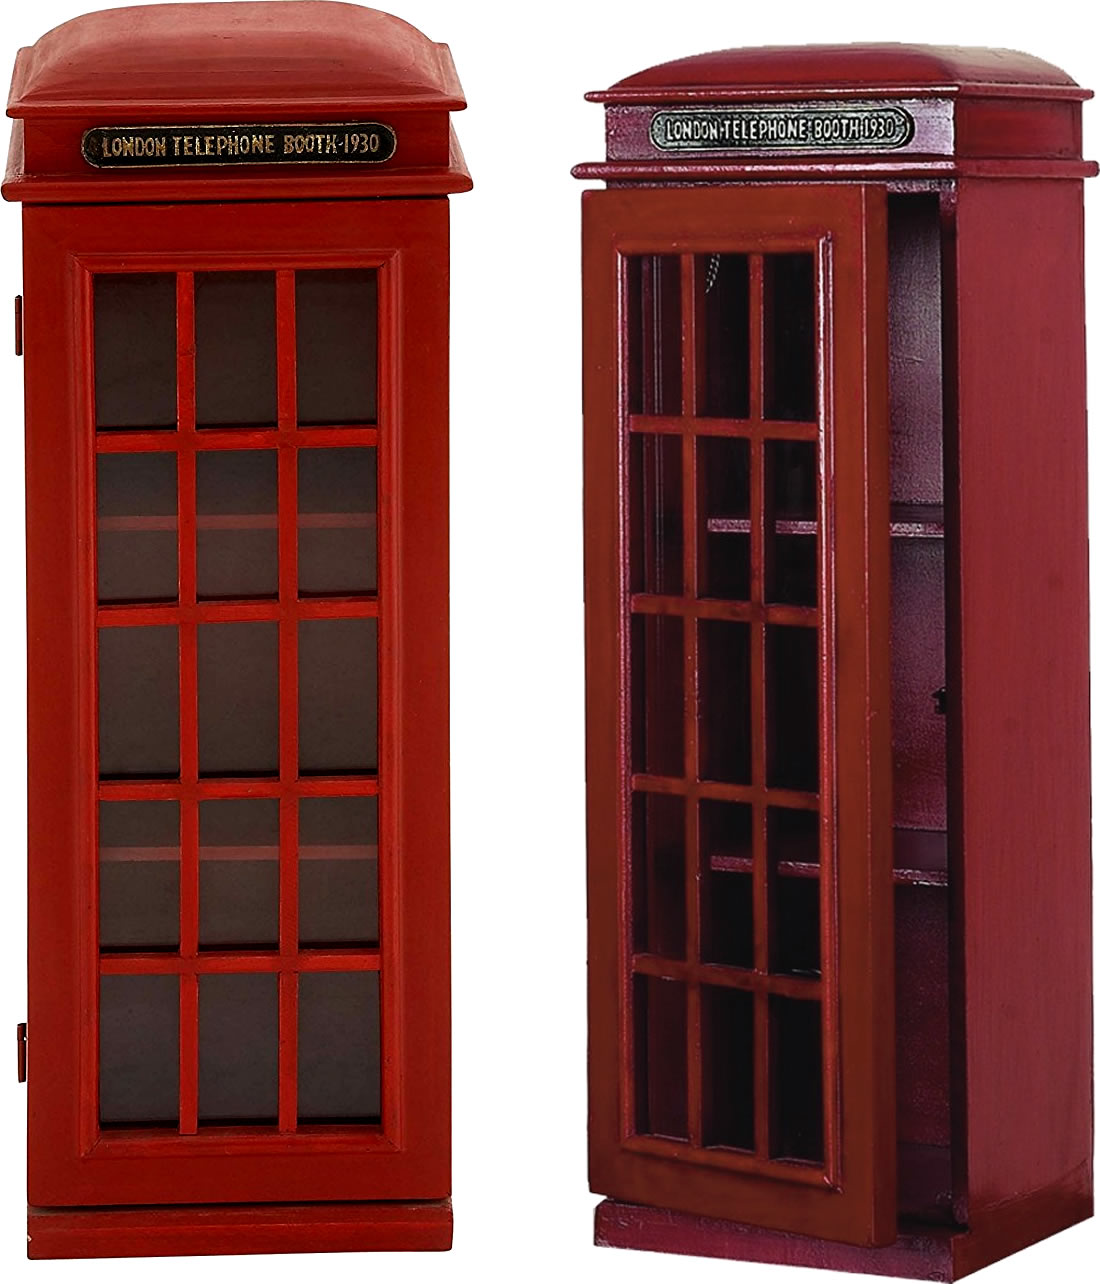 Bring A British Phone Booth Into Your Home My Design42